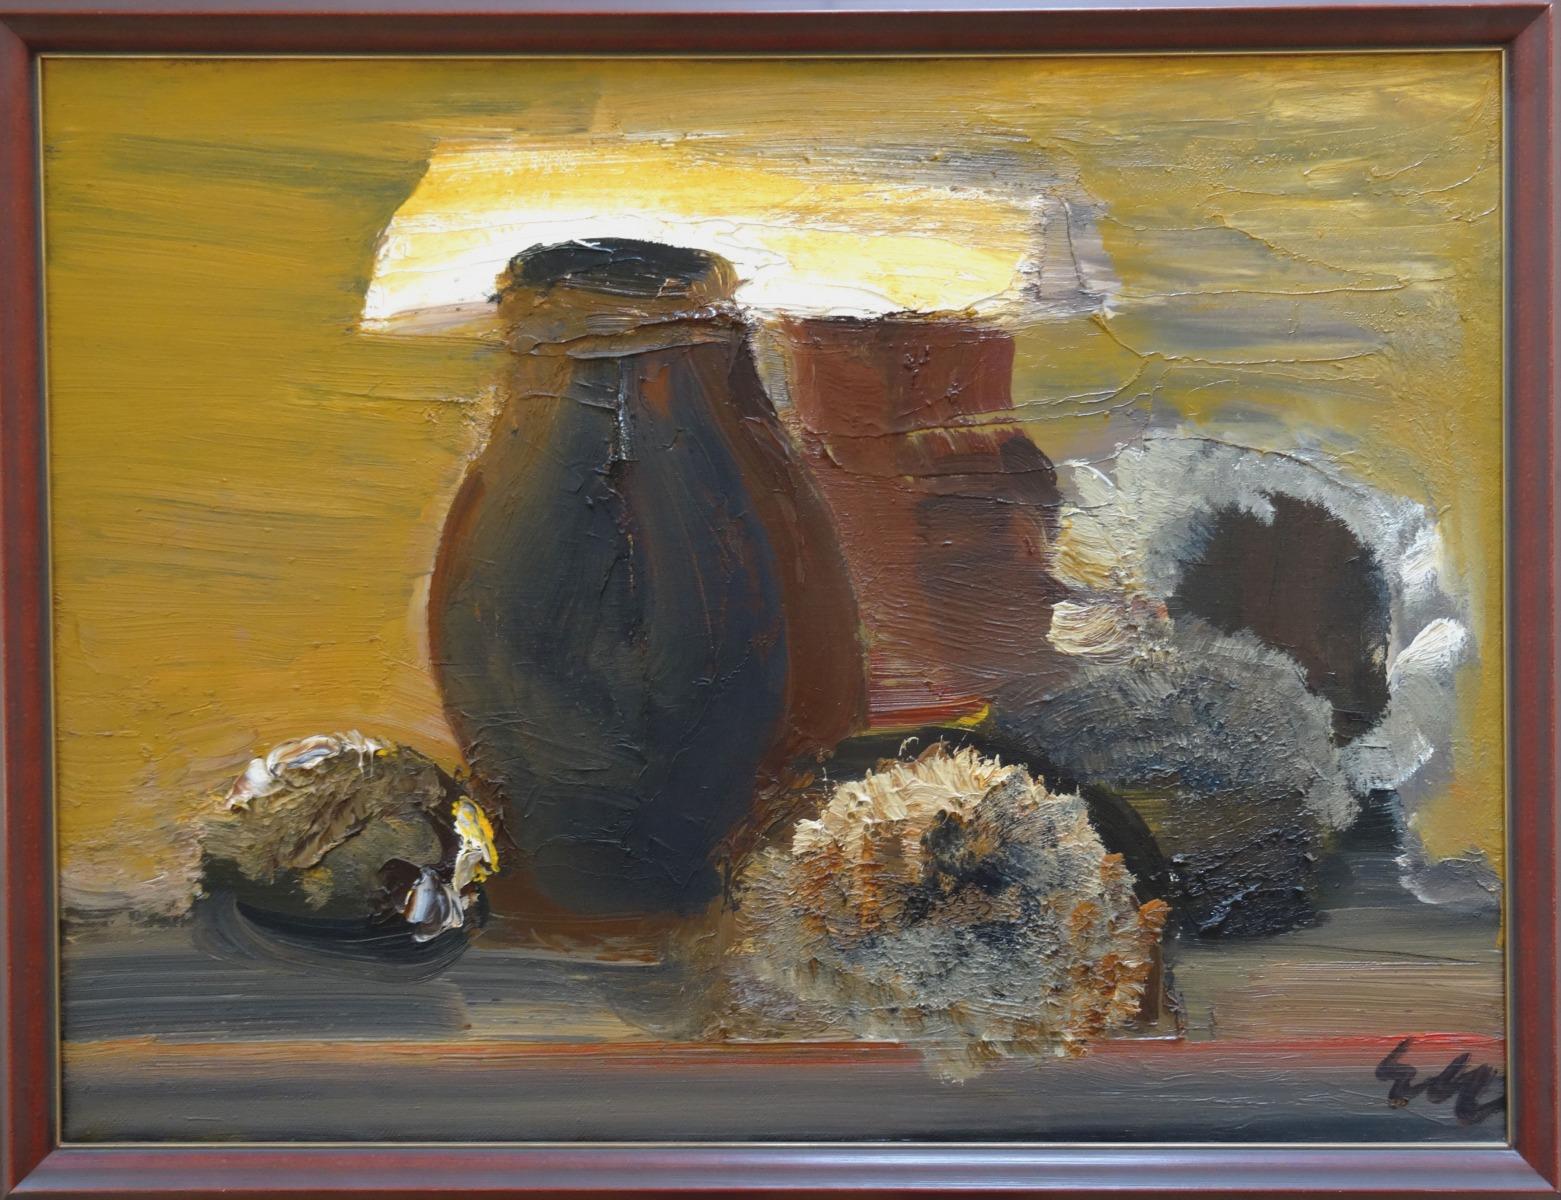 Still life with sunflowers. Canvas, oil, 60x80 cm - Expressionist Painting by Edvards Grube